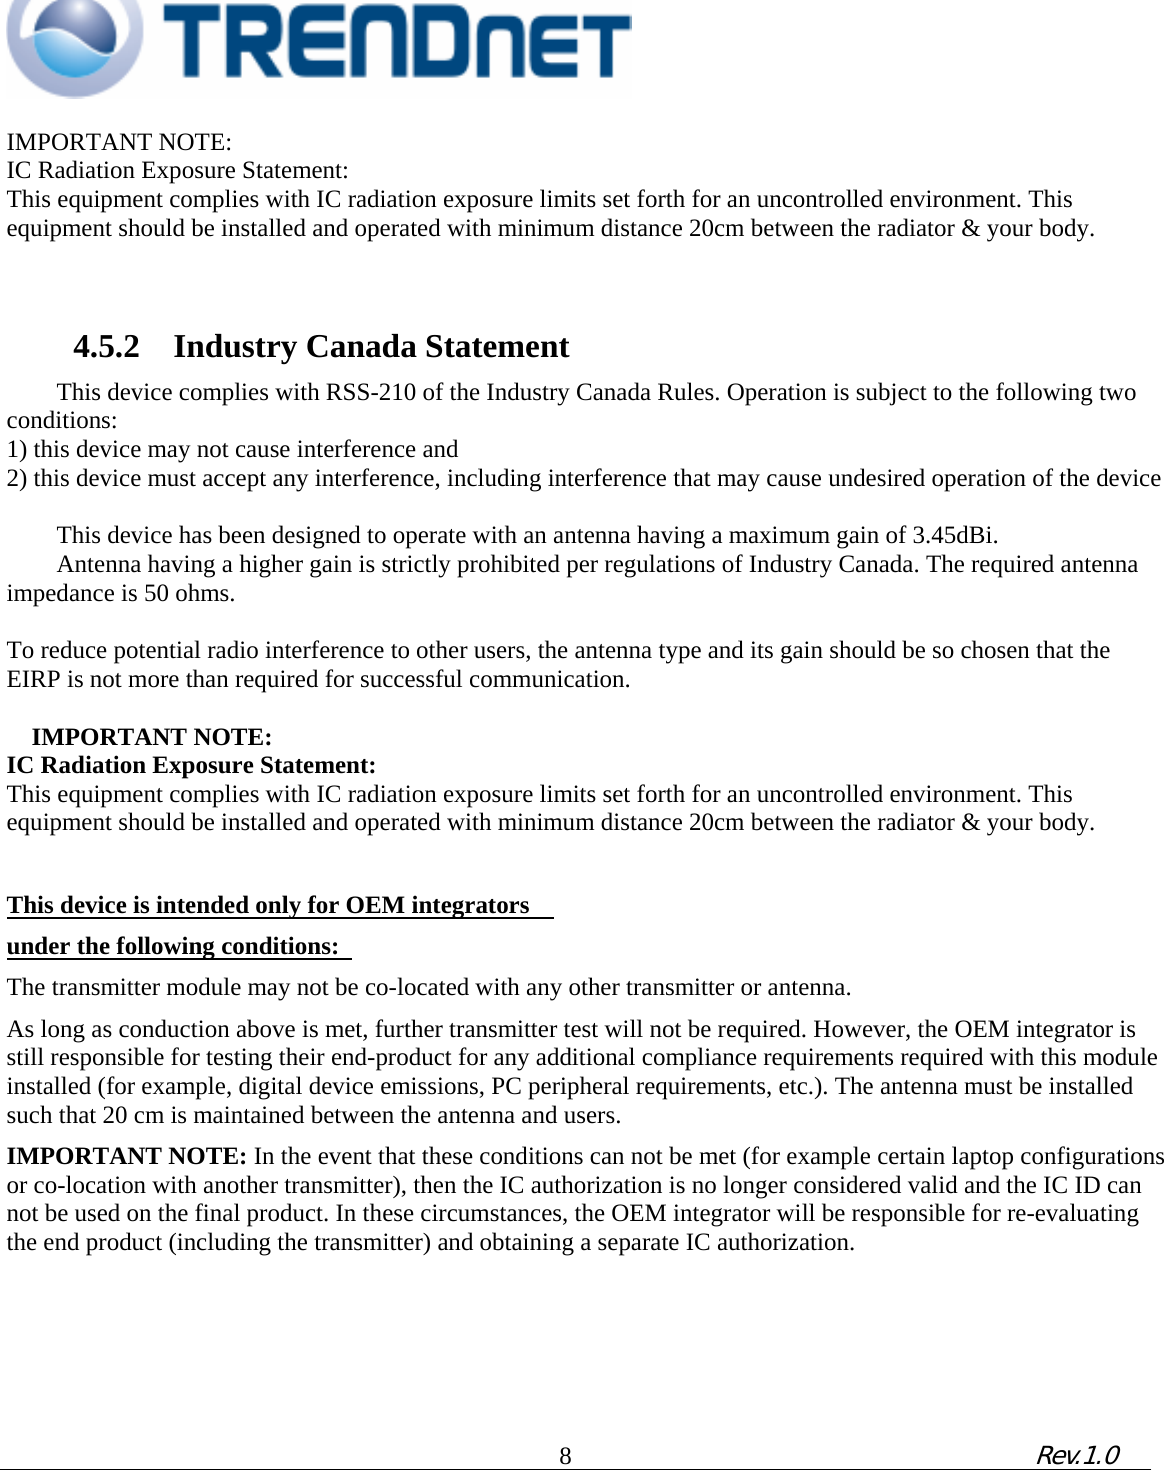                                                                                                                                          IMPORTANT NOTE:   IC Radiation Exposure Statement:   This equipment complies with IC radiation exposure limits set forth for an uncontrolled environment. This equipment should be installed and operated with minimum distance 20cm between the radiator &amp; your body.         4.5.2    Industry Canada Statement   This device complies with RSS-210 of the Industry Canada Rules. Operation is subject to the following two conditions:  1) this device may not cause interference and   2) this device must accept any interference, including interference that may cause undesired operation of the device    This device has been designed to operate with an antenna having a maximum gain of 3.45dBi.   Antenna having a higher gain is strictly prohibited per regulations of Industry Canada. The required antenna   impedance is 50 ohms.     To reduce potential radio interference to other users, the antenna type and its gain should be so chosen that the EIRP is not more than required for successful communication.       IMPORTANT NOTE:   IC Radiation Exposure Statement:   This equipment complies with IC radiation exposure limits set forth for an uncontrolled environment. This equipment should be installed and operated with minimum distance 20cm between the radiator &amp; your body.     This device is intended only for OEM integrators     under the following conditions:   The transmitter module may not be co-located with any other transmitter or antenna.   As long as conduction above is met, further transmitter test will not be required. However, the OEM integrator is still responsible for testing their end-product for any additional compliance requirements required with this module installed (for example, digital device emissions, PC peripheral requirements, etc.). The antenna must be installed such that 20 cm is maintained between the antenna and users.   IMPORTANT NOTE: In the event that these conditions can not be met (for example certain laptop configurations or co-location with another transmitter), then the IC authorization is no longer considered valid and the IC ID can not be used on the final product. In these circumstances, the OEM integrator will be responsible for re-evaluating the end product (including the transmitter) and obtaining a separate IC authorization.               8             Rev.1.0   